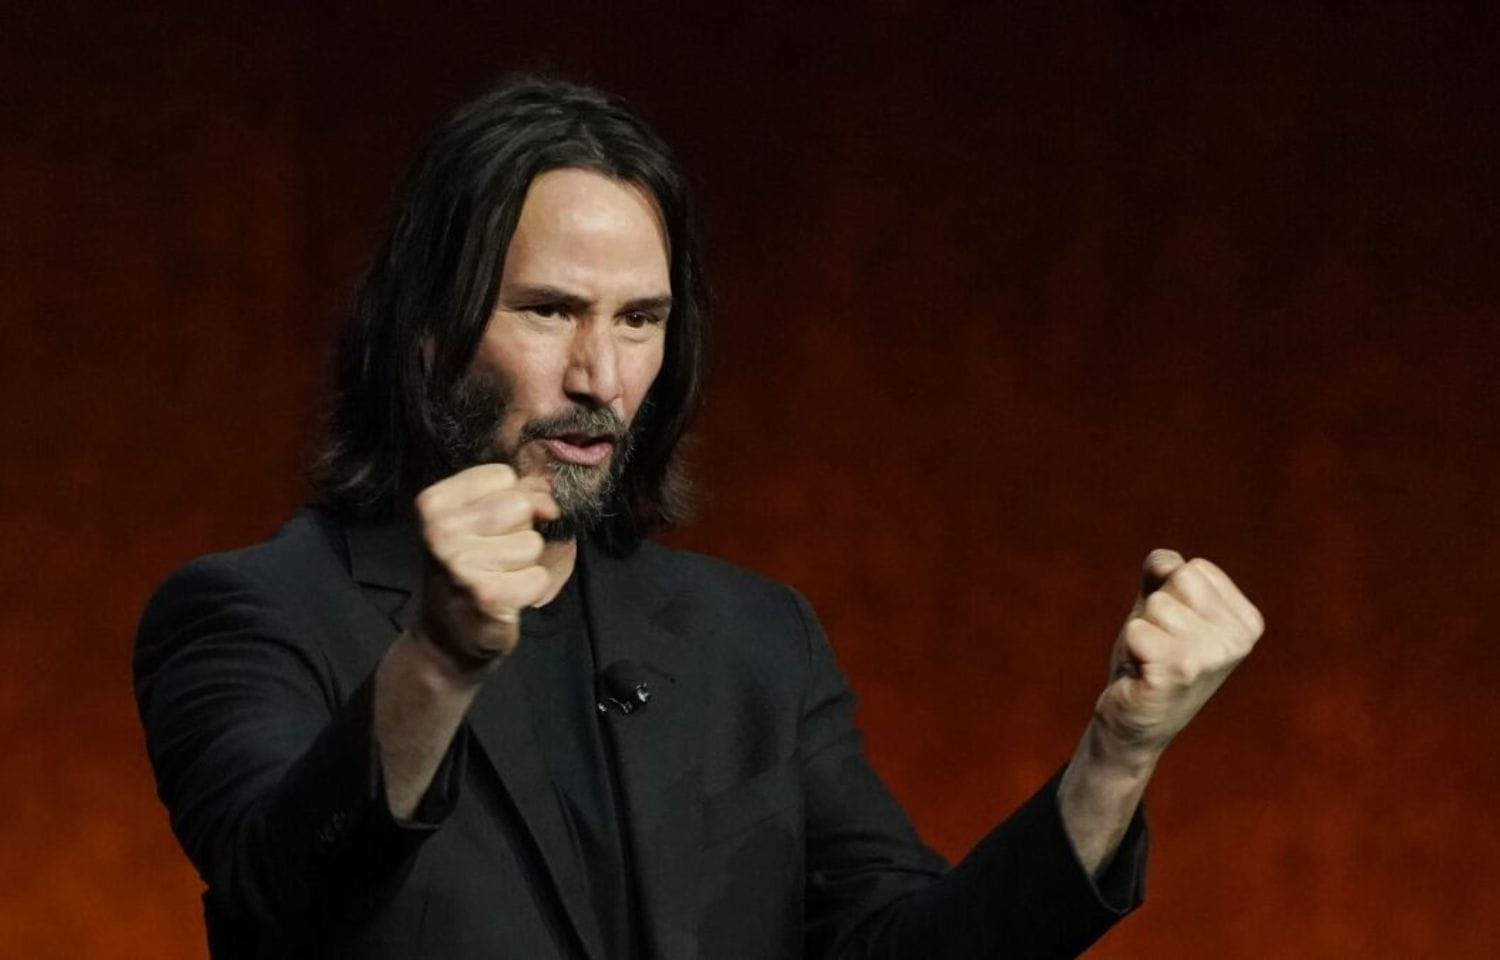 Keanu Reeves' Humble Reaction to Having Fungus-killing Bacteria Named After Him